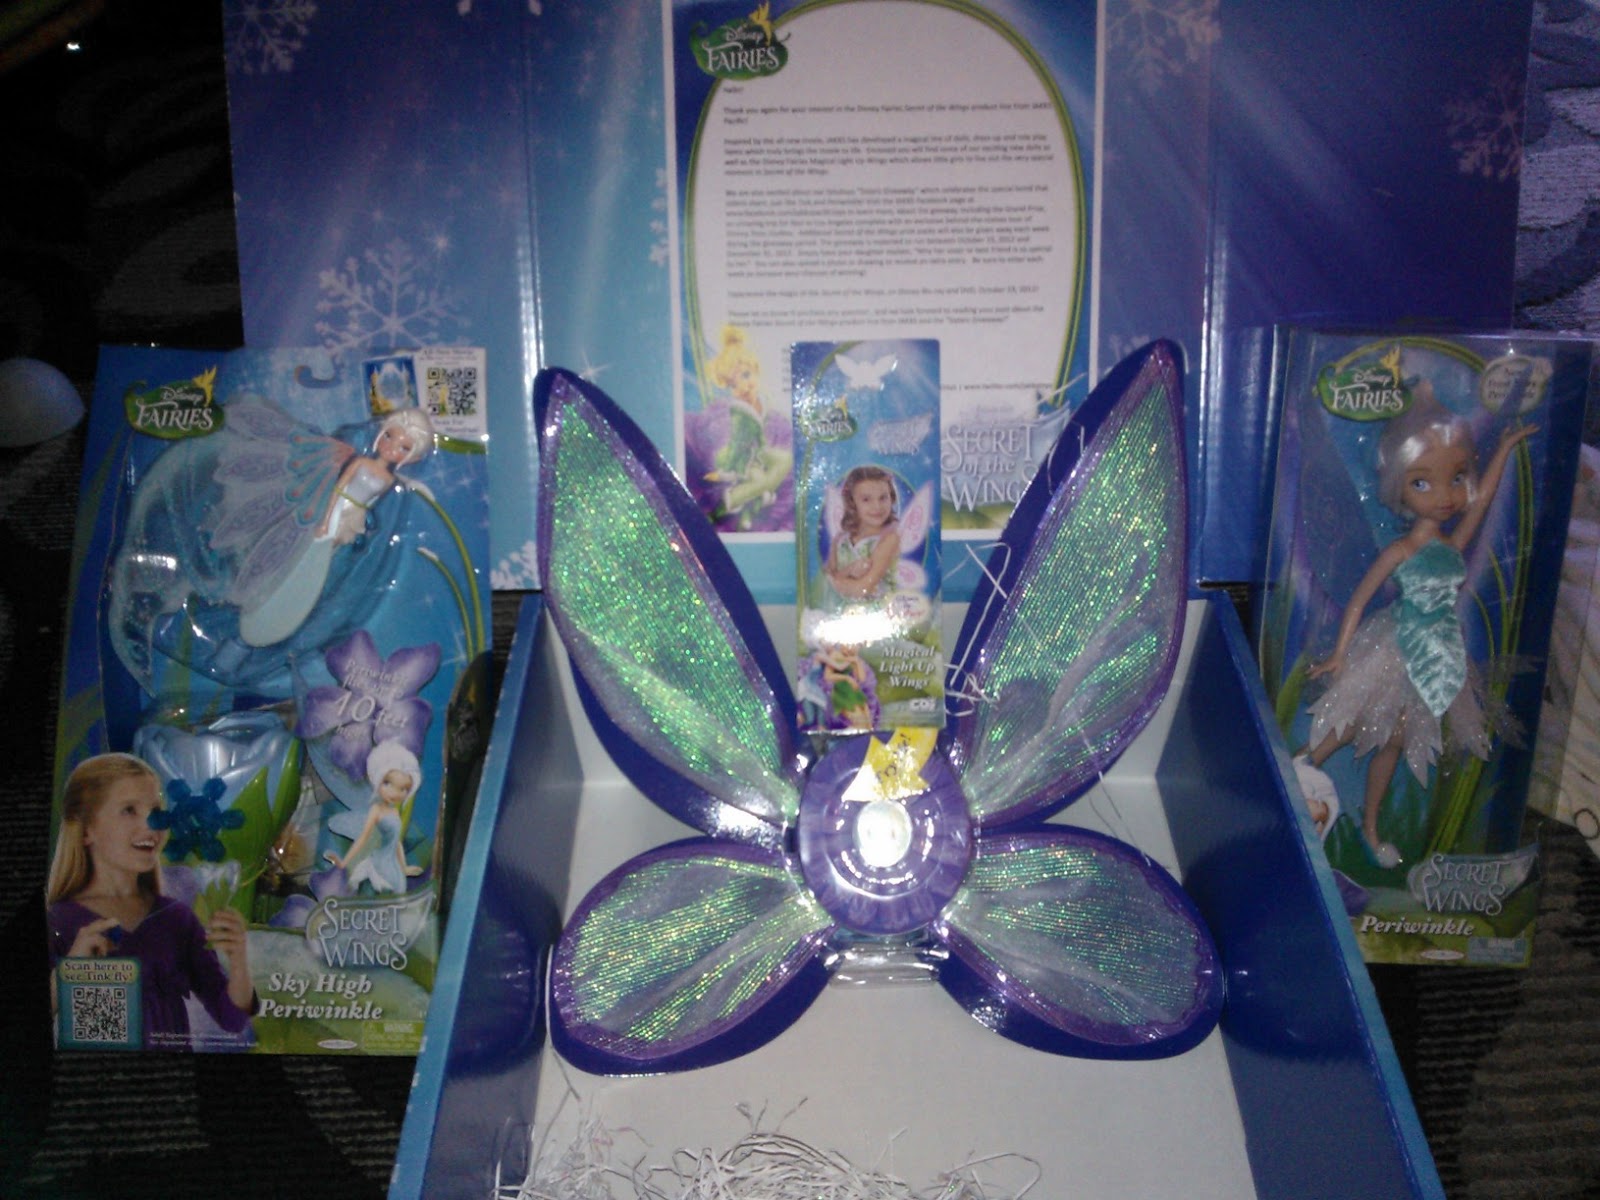 Disney Fairies Secret Of The Wings Toys Holiday Guide 2012